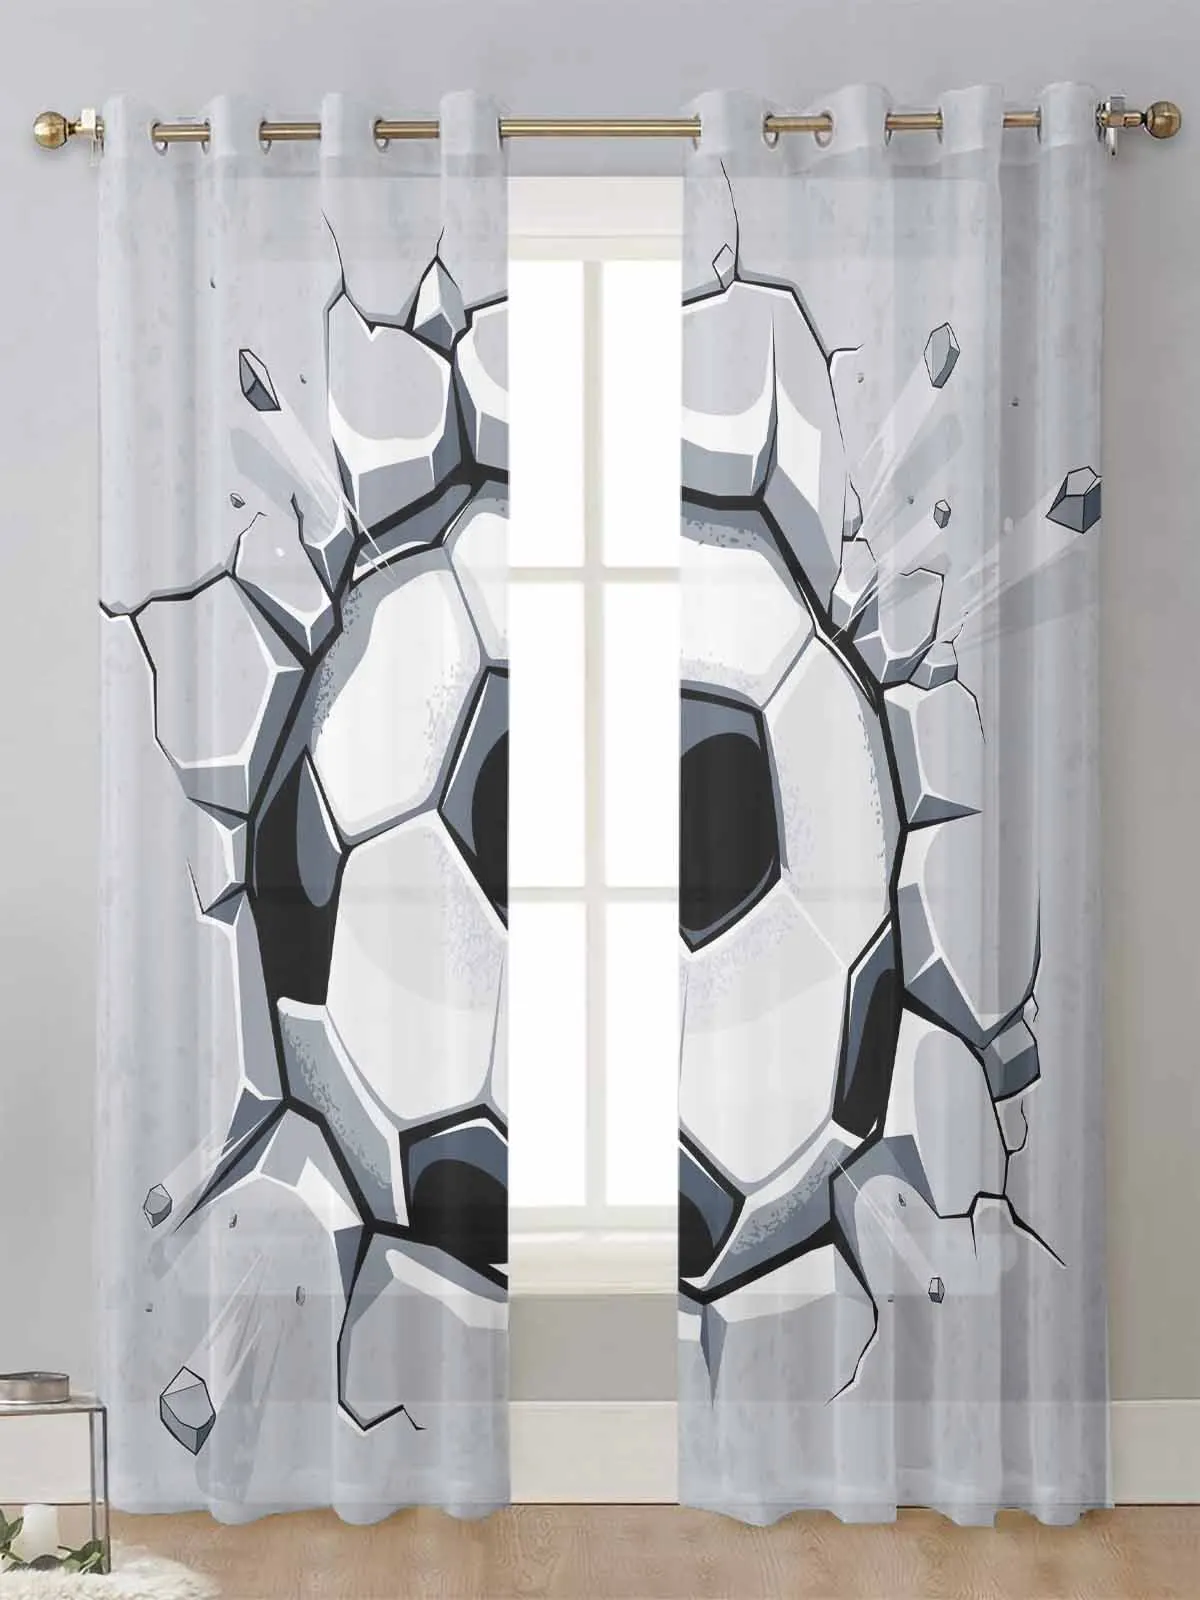 

Football Wall Broken Sheer Curtains For Living Room Window Screening Transparent Voile Tulle Curtain Cortinas Drapes Home Decor